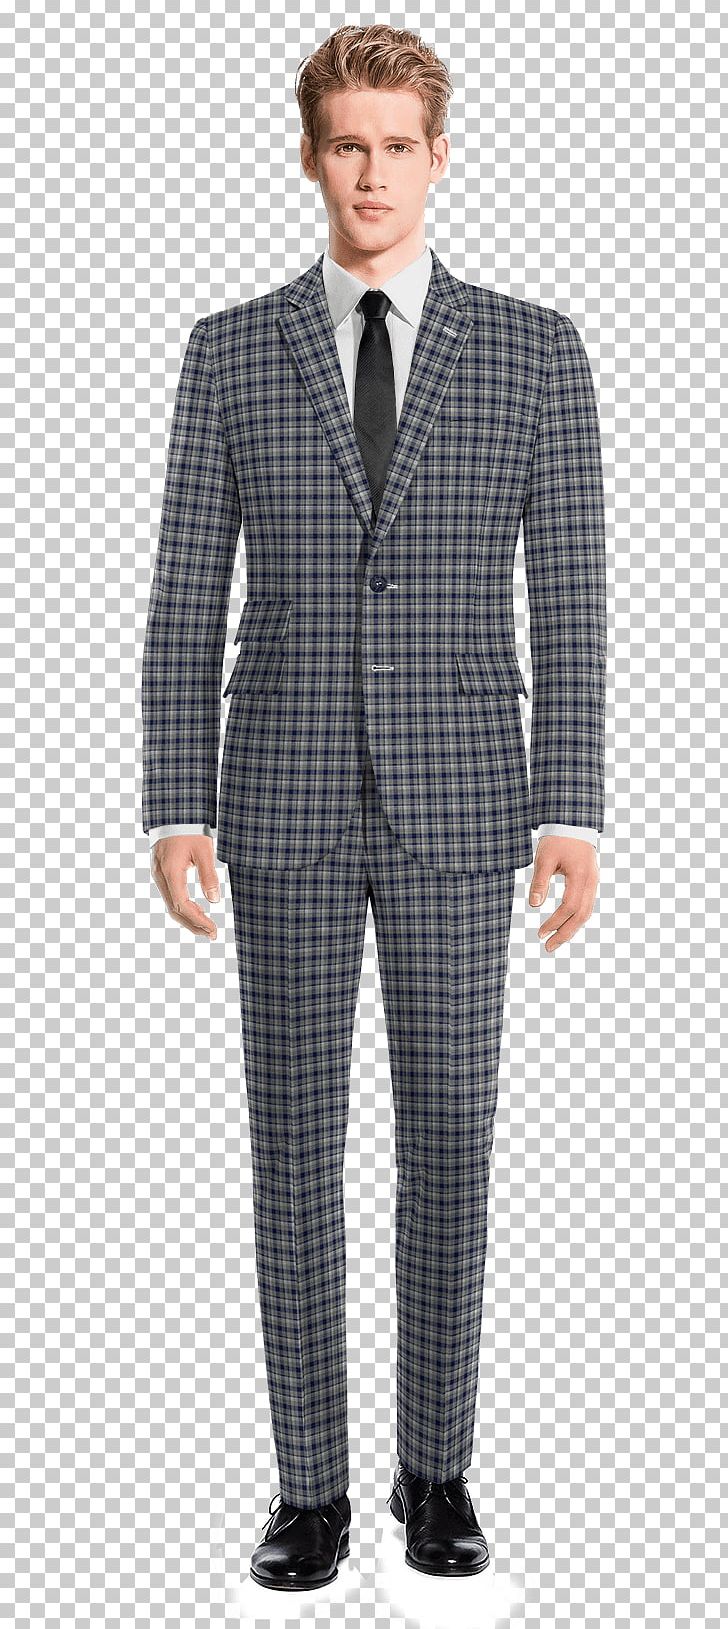 Suit Wool Tweed Paisley Upturned Collar PNG, Clipart, Blazer, Business, Businessperson, Clothing, Corduroy Free PNG Download